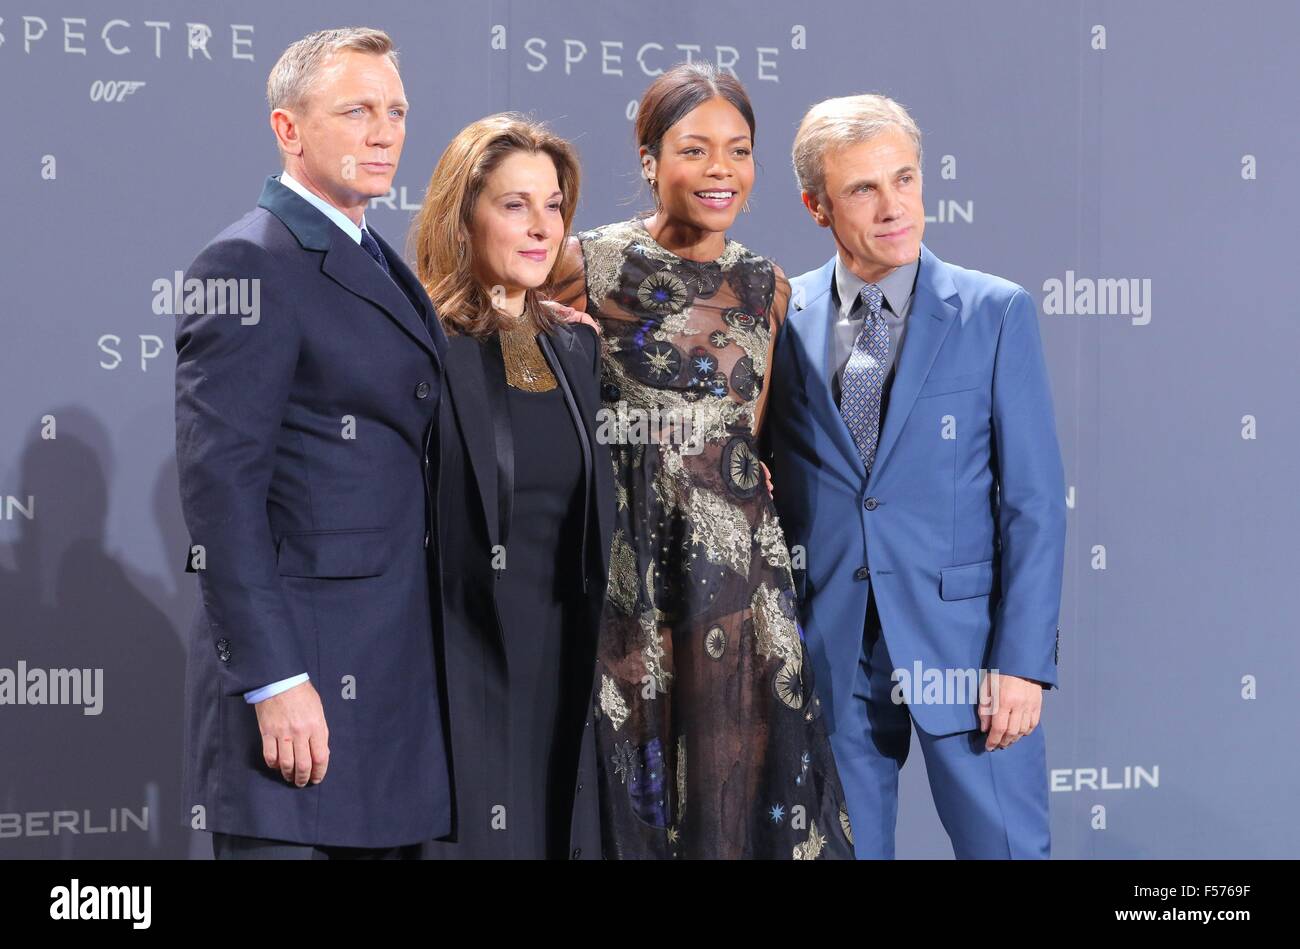 Berlin, Germany. 28th Oct, 2015. (l-r) Daniel Craig, american film producer Barbara Broccoli, Naomie Harris and Christoph Waltz at the Premiere of the new James Bond Film 'Spectre' at the Cinestar Sonycenter in Berlin, Germany. On October 287th, 2015./picture alliance Credit:  dpa picture alliance/Alamy Live News Stock Photo